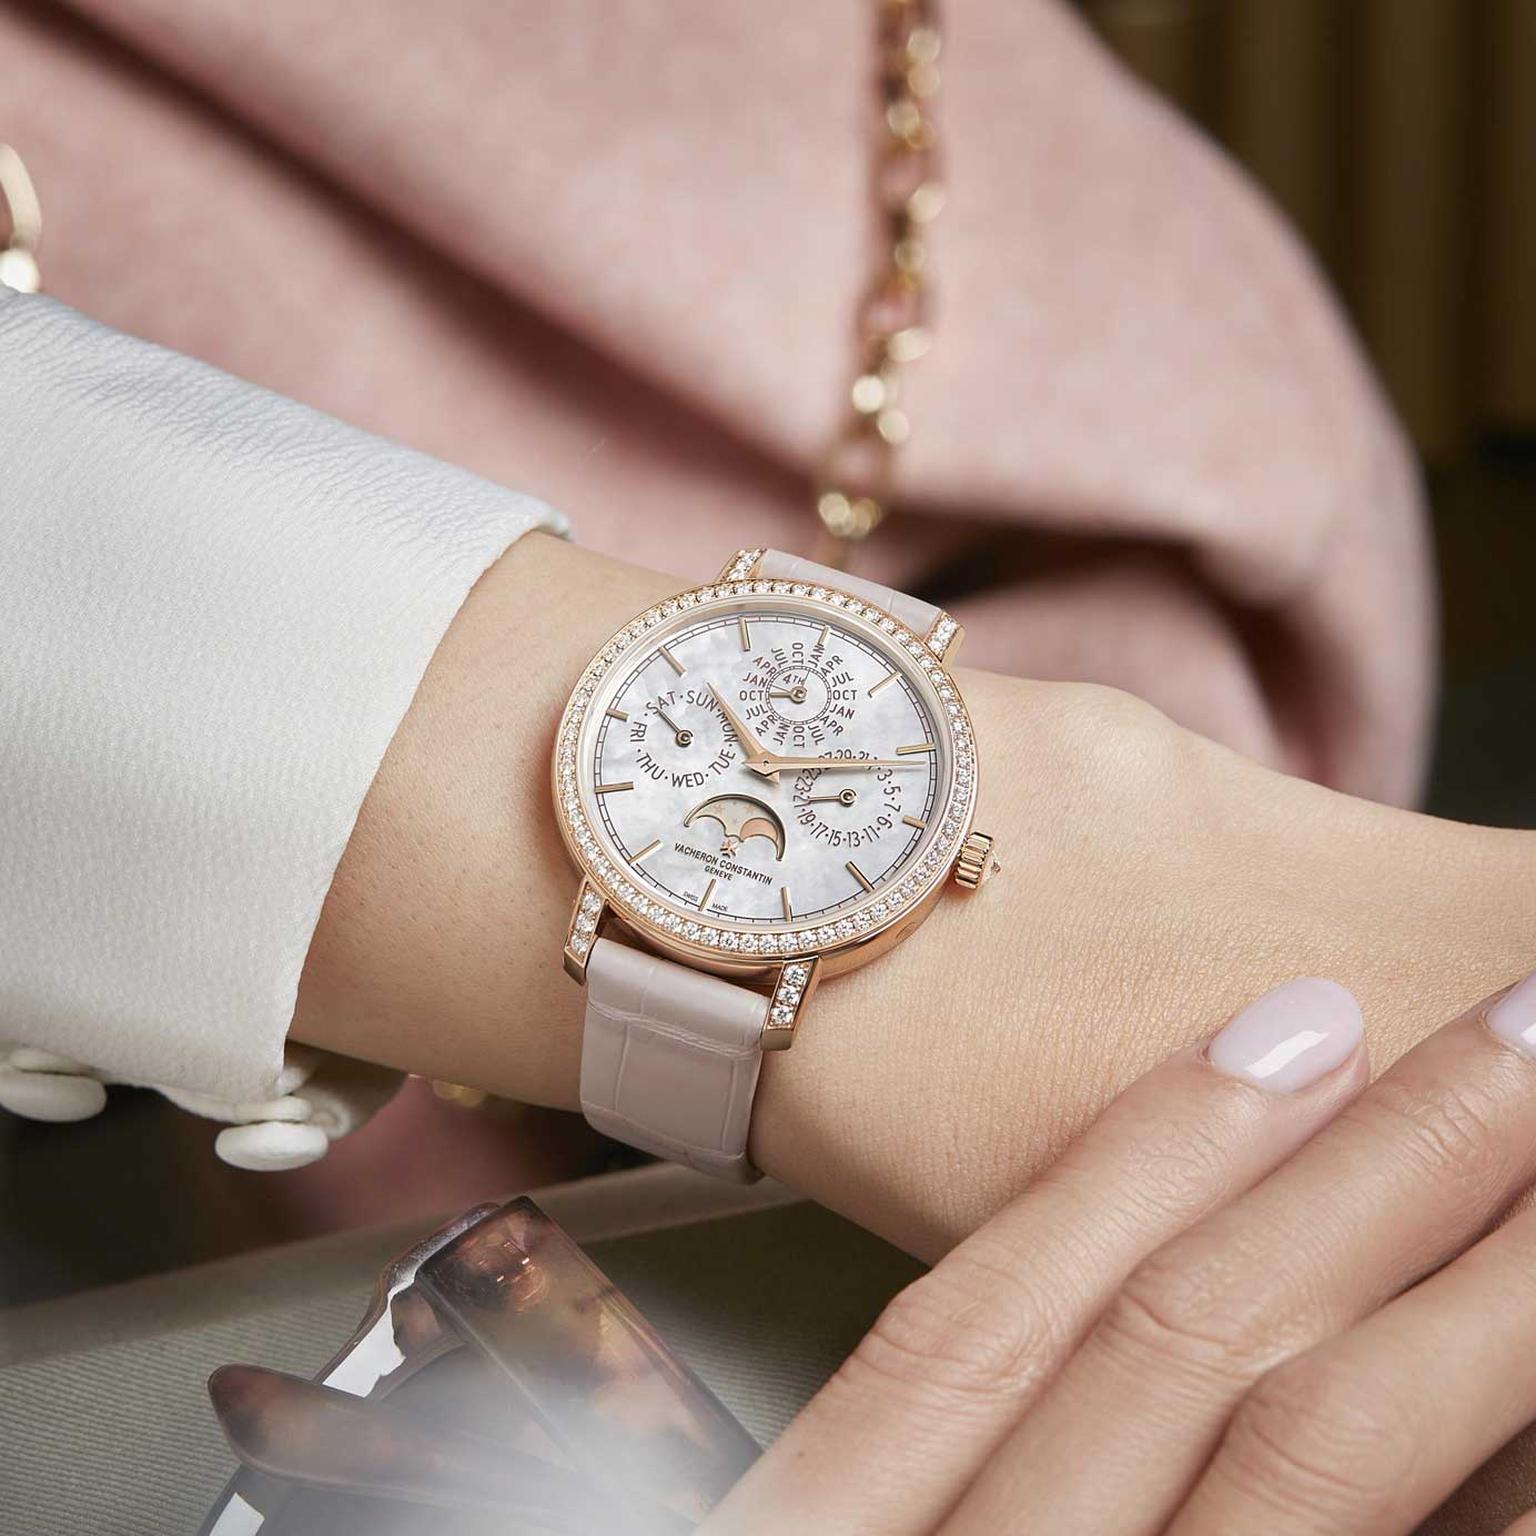 Luxury Items Like Watches And Jewelry Are Getting Even More Expensive -  Ideal Luxury